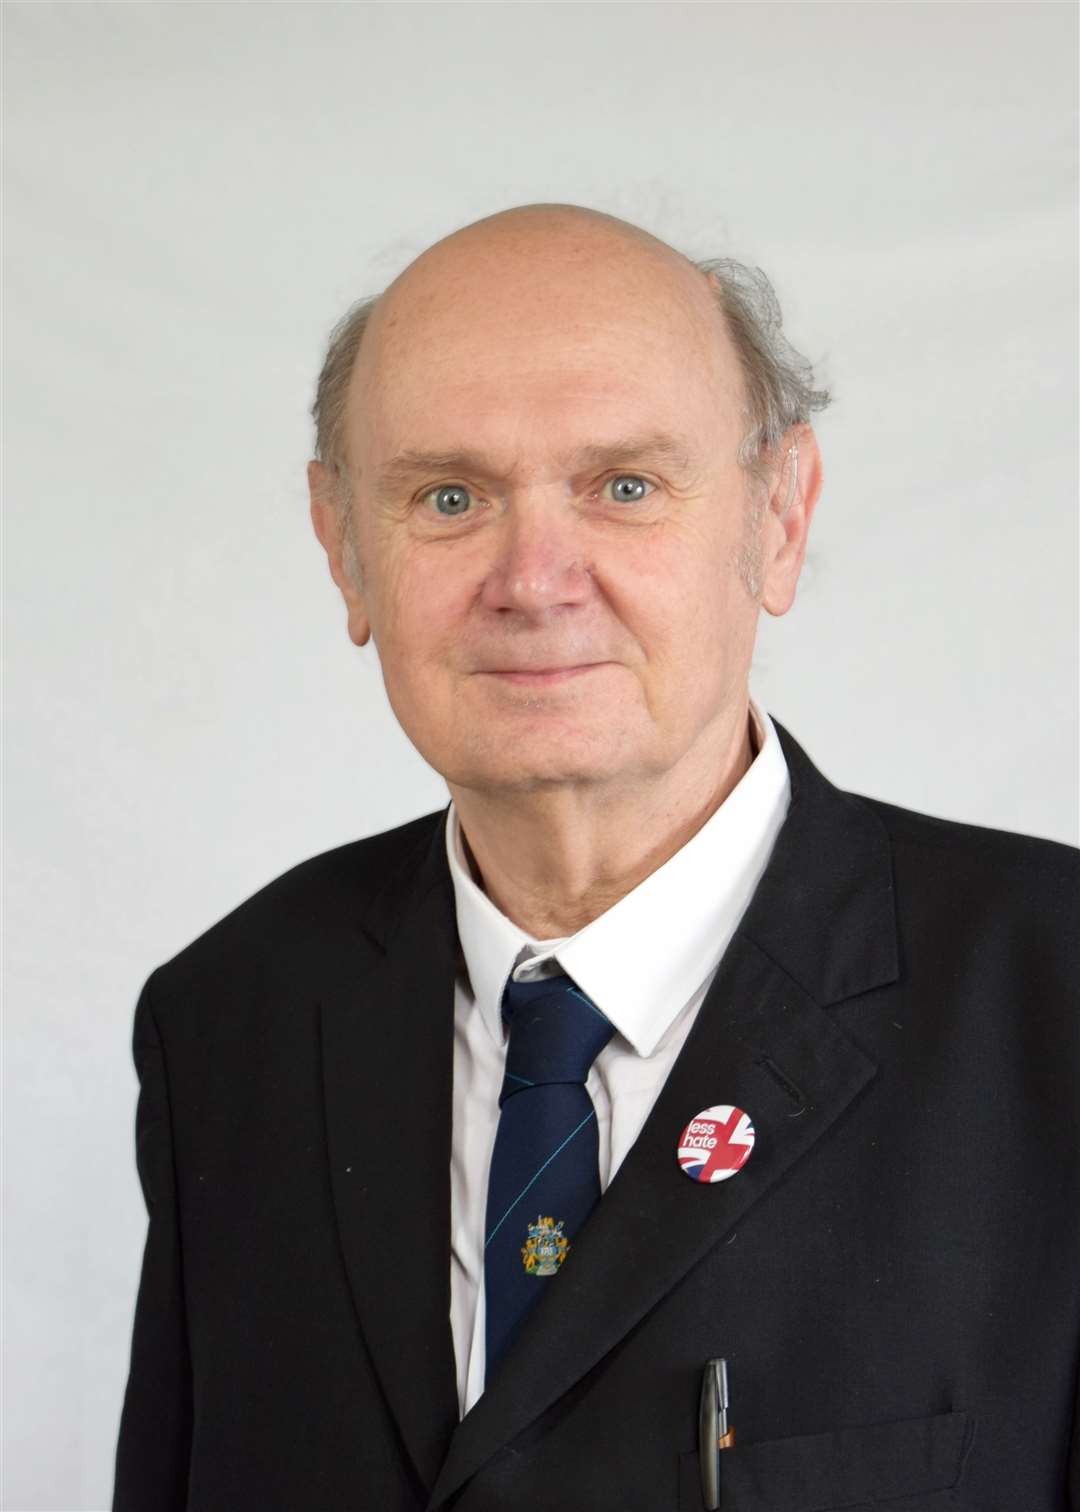 Cllr Charles Joyce. Picture: West Norfolk Council